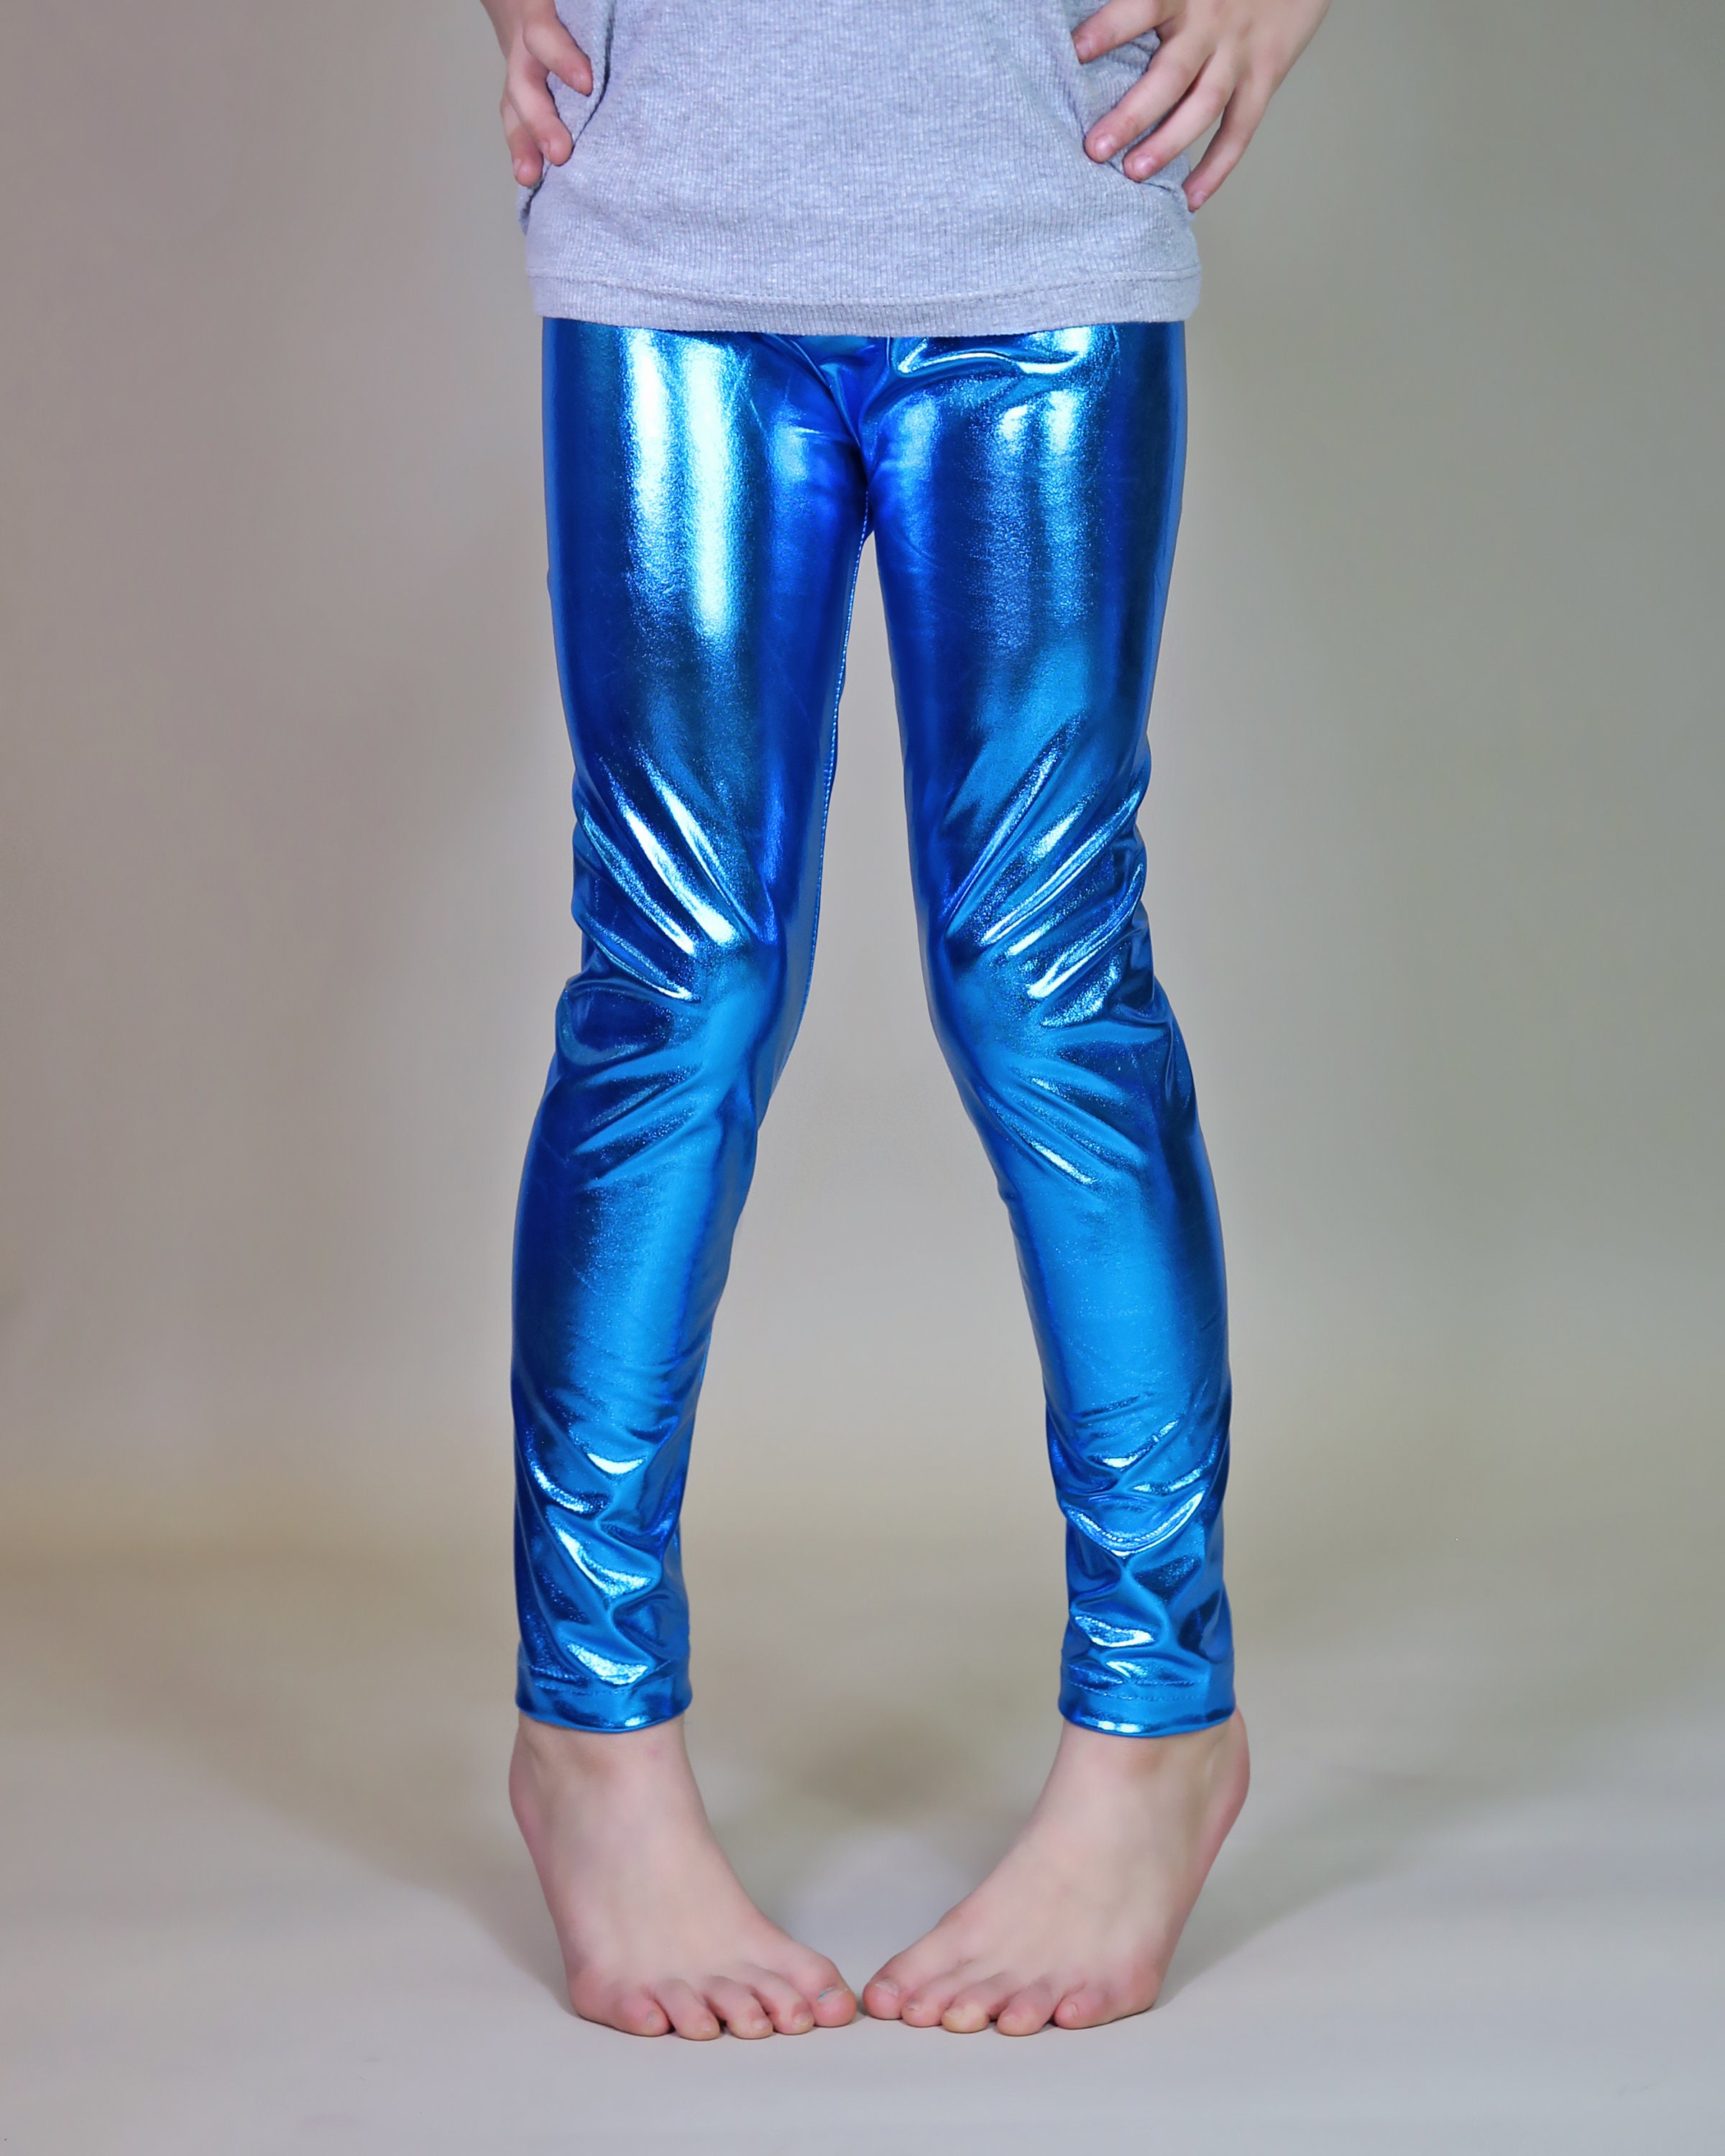 Blueberry Blue Shiny Leggings Wet Look Metallic Stretchy Tights Navy Gloss  Exercise Clothing Festive Festival Outwear Streetwear Wet Shine -   Canada